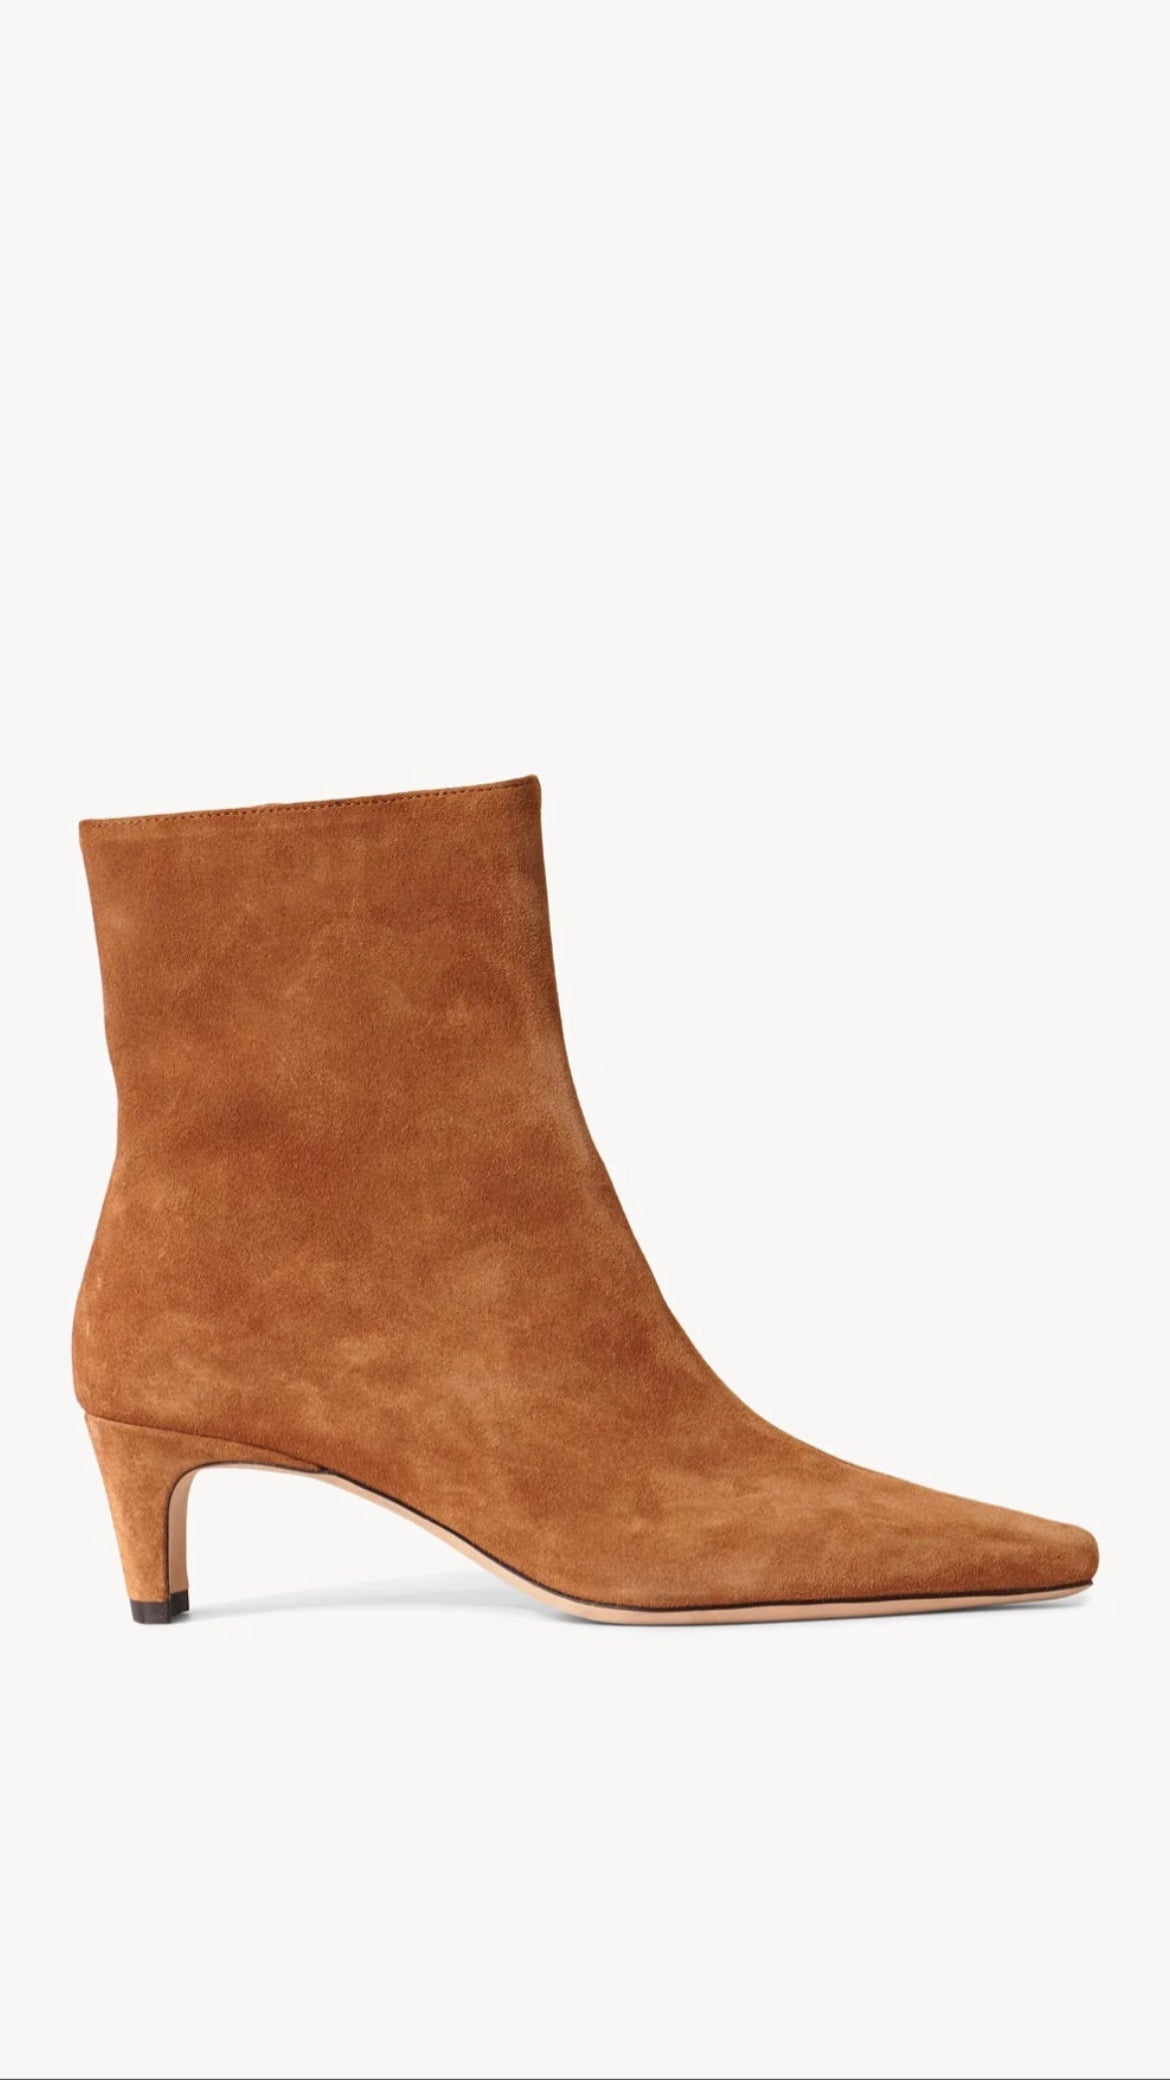 Staud- Wally Ankle Boot- Tan Suede